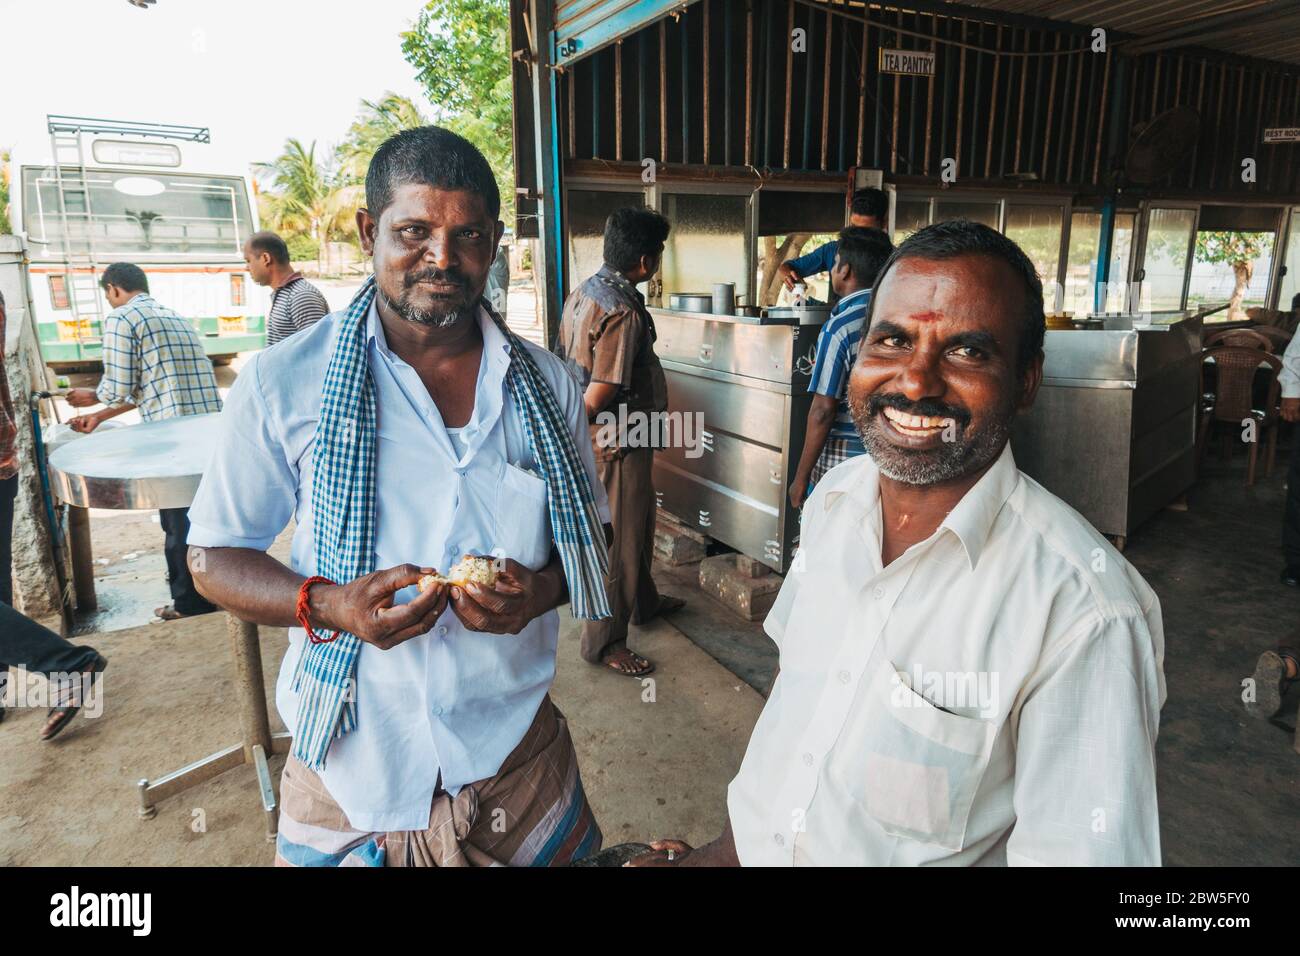 Two Indian men smile to the camera at a bus stop in Tamil Nadu, India Stock Photo